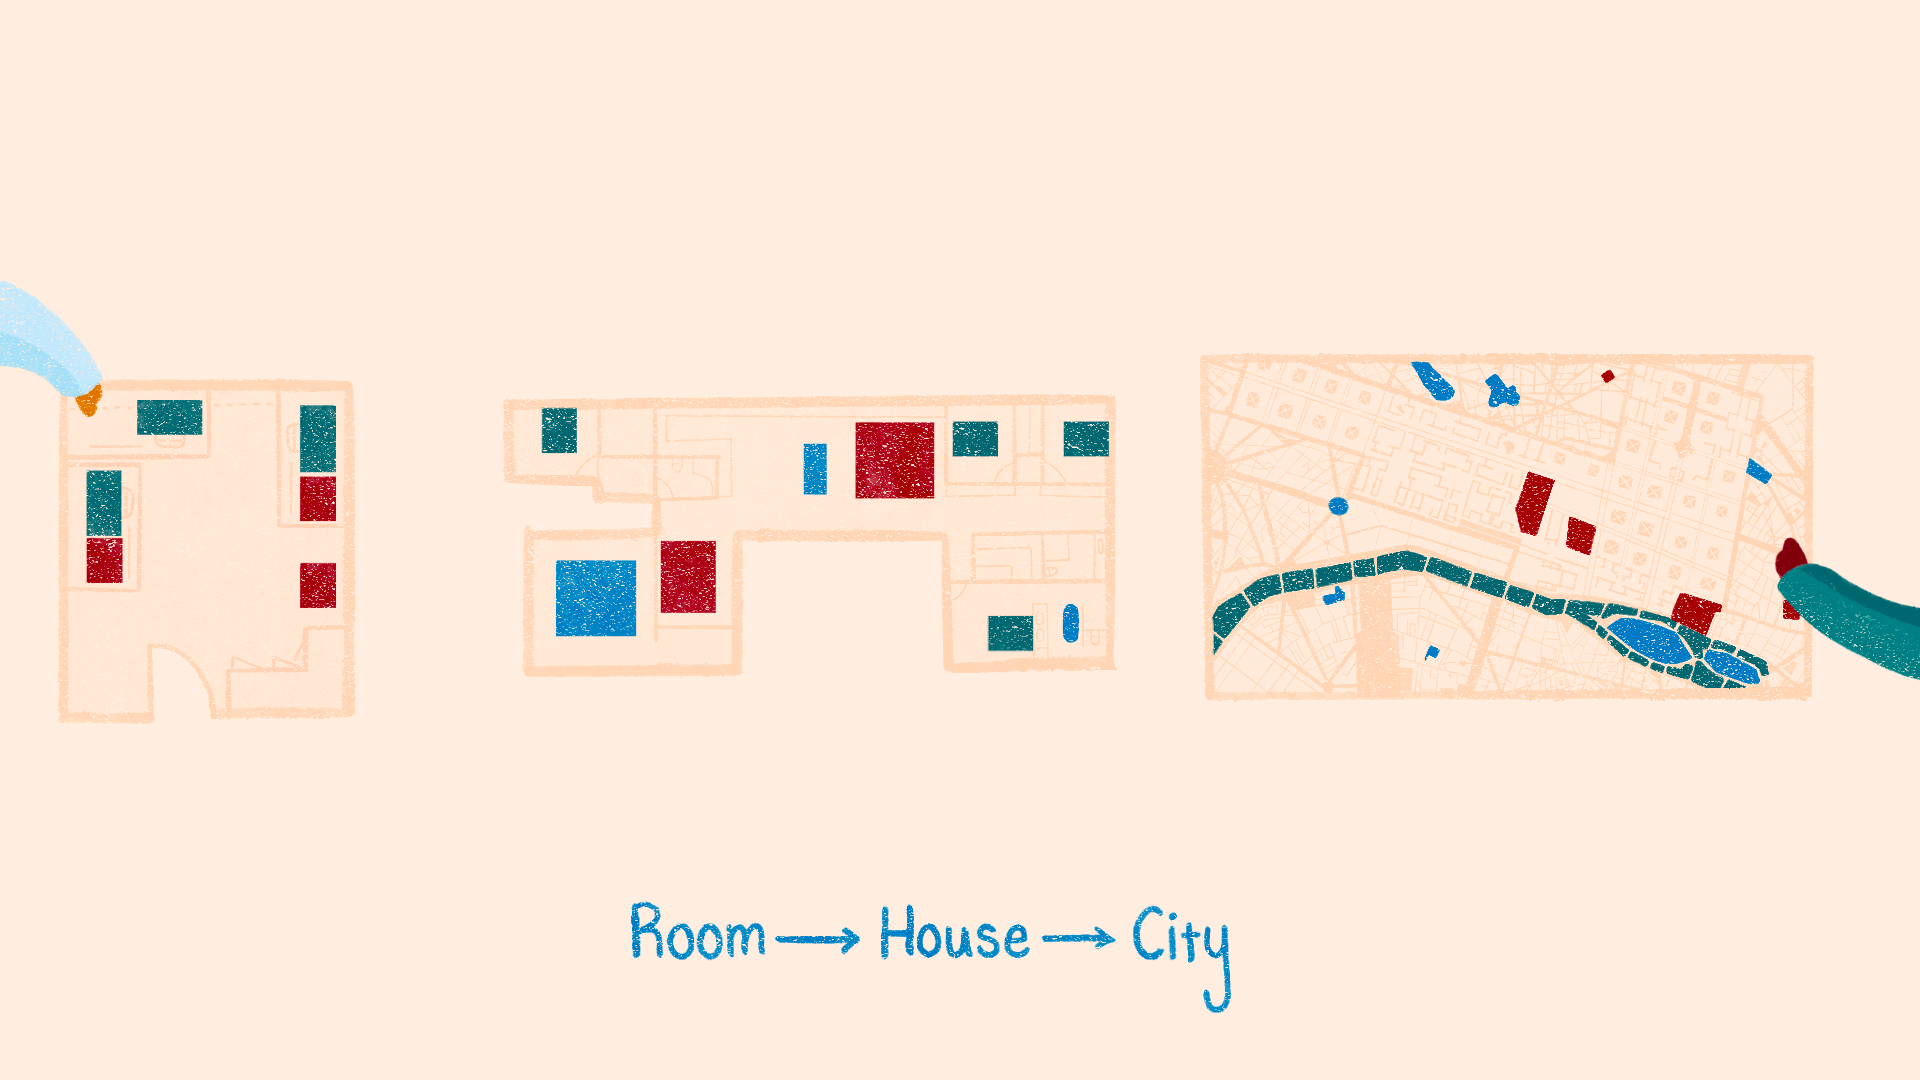 Illustrated blueprint of a single room, a house, and a city.